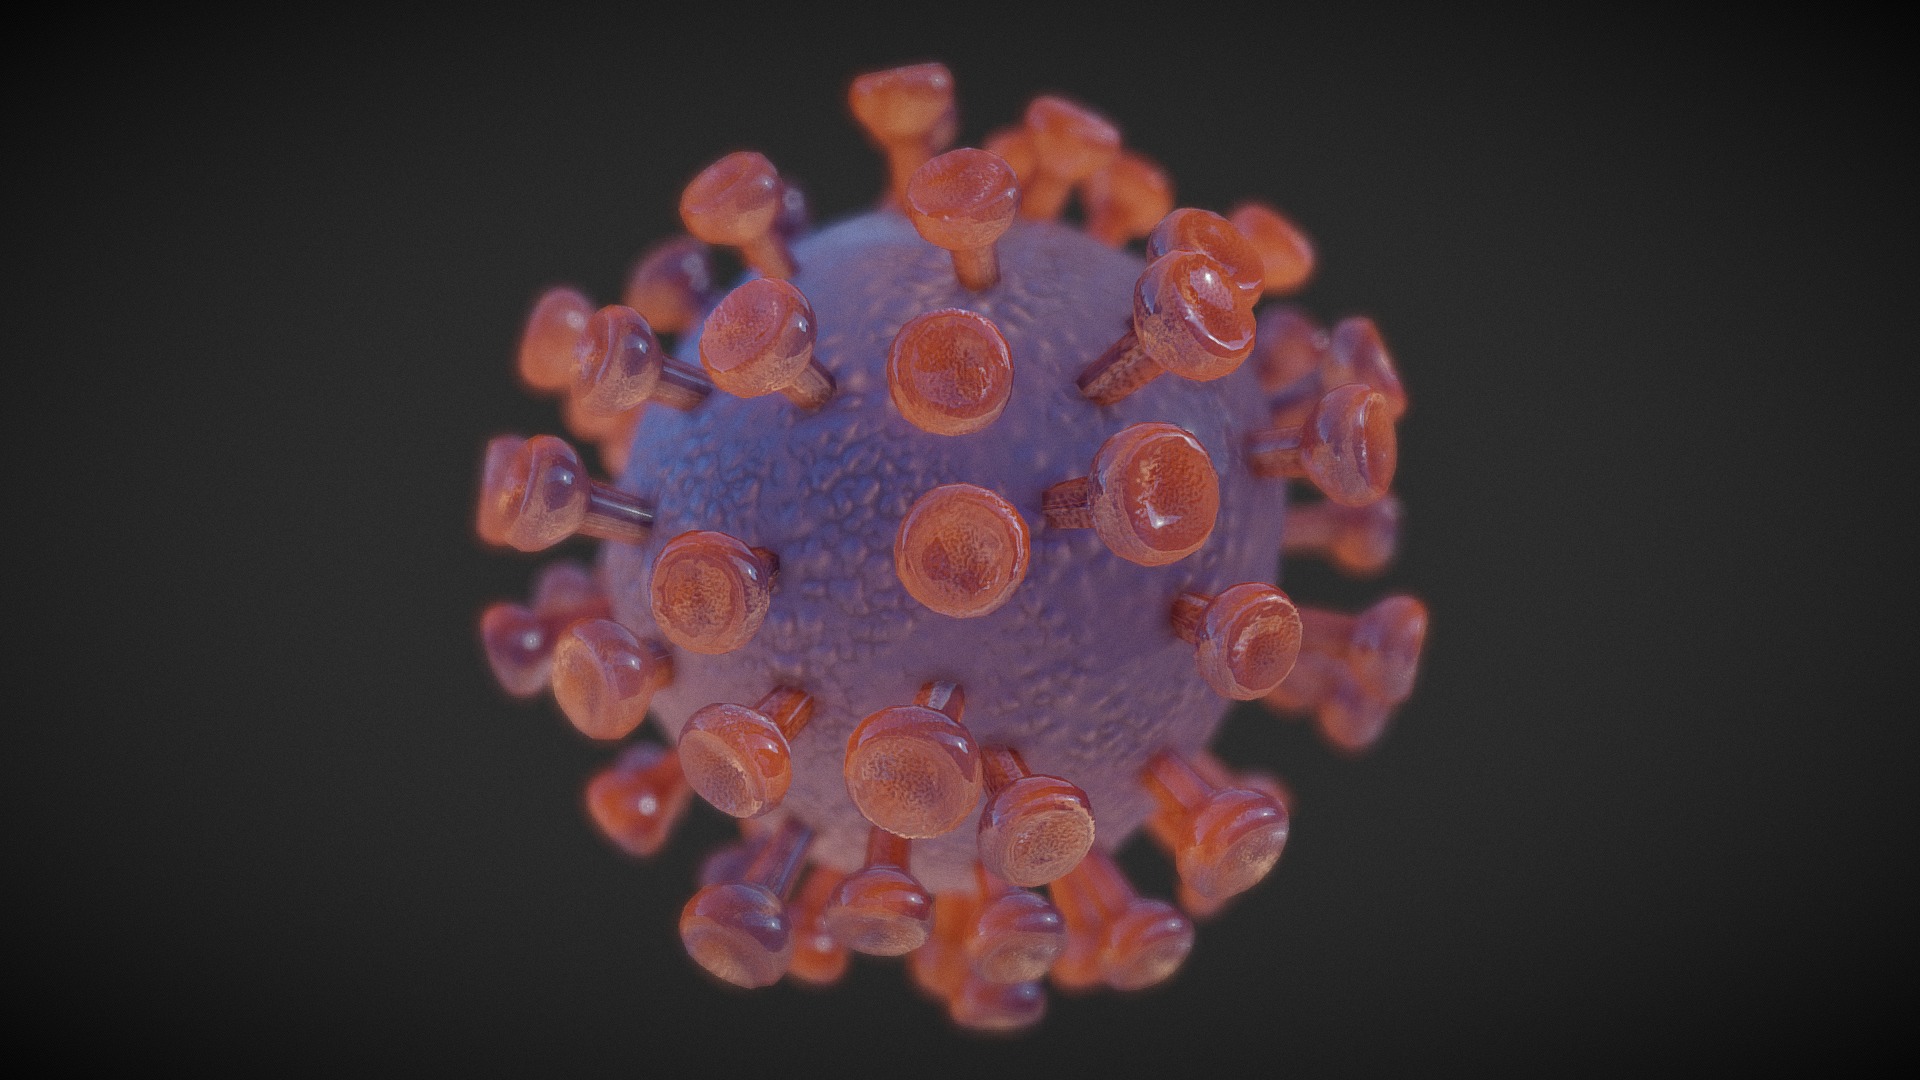 3D model Corona virus - This is a 3D model of the Corona virus. The 3D model is about a group of colorful objects.